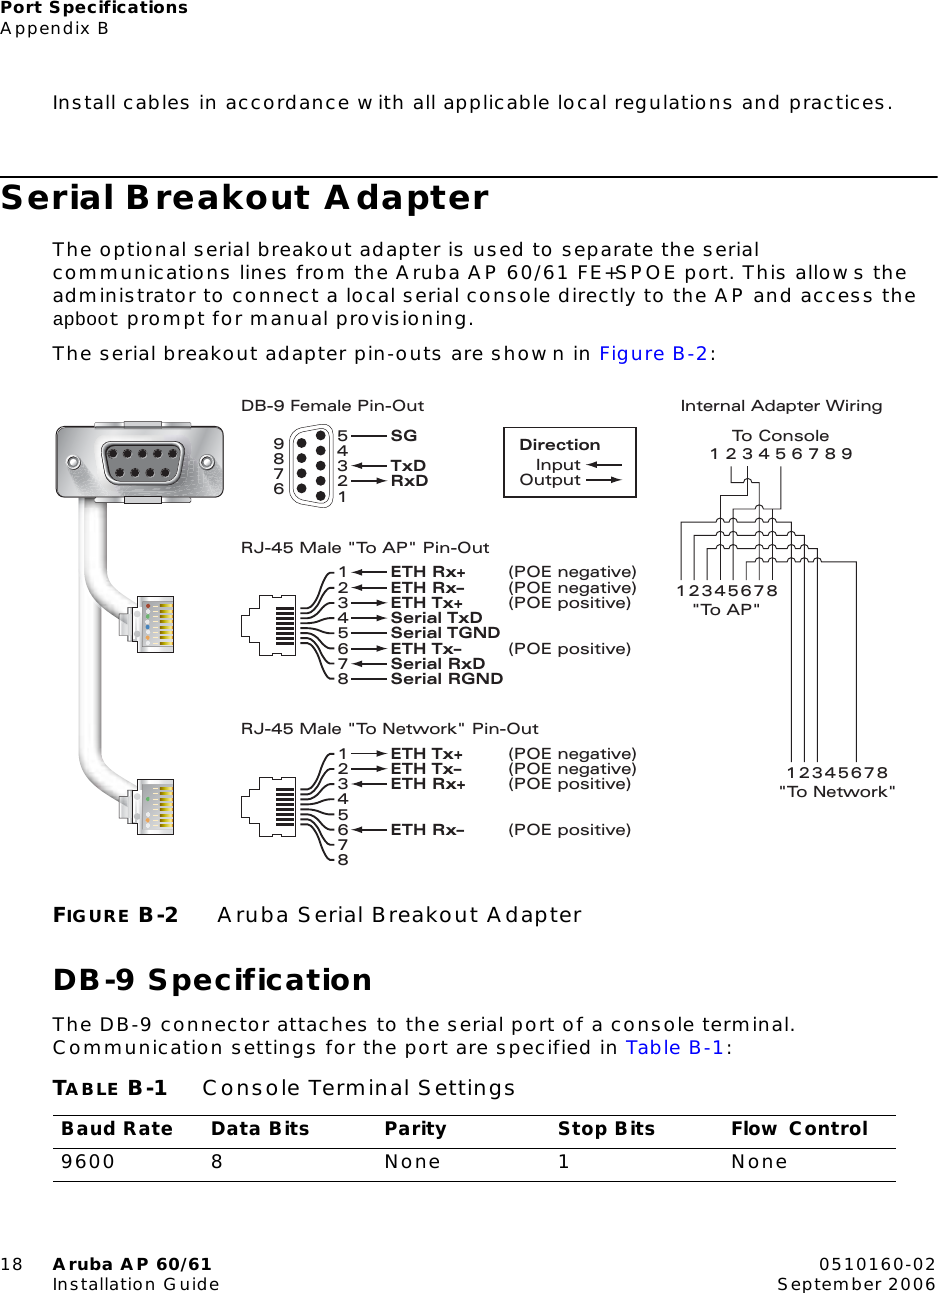 Port SpecificationsAppendix B18 Aruba AP 60/61 0510160-02Installation Guide September 2006Install cables in accordance with all applicable local regulations and practices.Serial Breakout AdapterThe optional serial breakout adapter is used to separate the serial communications lines from the Aruba AP 60/61 FE+SPOE port. This allows the administrator to connect a local serial console directly to the AP and access the apboot prompt for manual provisioning.The serial breakout adapter pin-outs are shown in Figure B-2:FIGURE B-2 Aruba Serial Breakout AdapterDB-9 SpecificationThe DB-9 connector attaches to the serial port of a console terminal. Communication settings for the port are specified in Table B-1:TABLE B-1 Console Terminal SettingsBaud Rate Data Bits Parity Stop Bits Flow Control9600 8 None 1 NoneRJ-45 Male &quot;To Network&quot; Pin-Out12345678ETH Tx+ (POE negative)ETH Tx– (POE negative)ETH Rx+ (POE positive)ETH Rx– (POE positive)Serial TxDSerial TGNDSerial RxDSerial RGNDRJ-45 Male &quot;To AP&quot; Pin-Out12345678ETH Rx+ (POE negative)ETH Rx– (POE negative)ETH Tx+ (POE positive)ETH Tx– (POE positive)RxDTxDSG543219876DB-9 Female Pin-OutInputOutputDirection 1234567891234567812345678Internal Adapter Wiring&quot;To AP&quot;&quot;To Network&quot;To Console